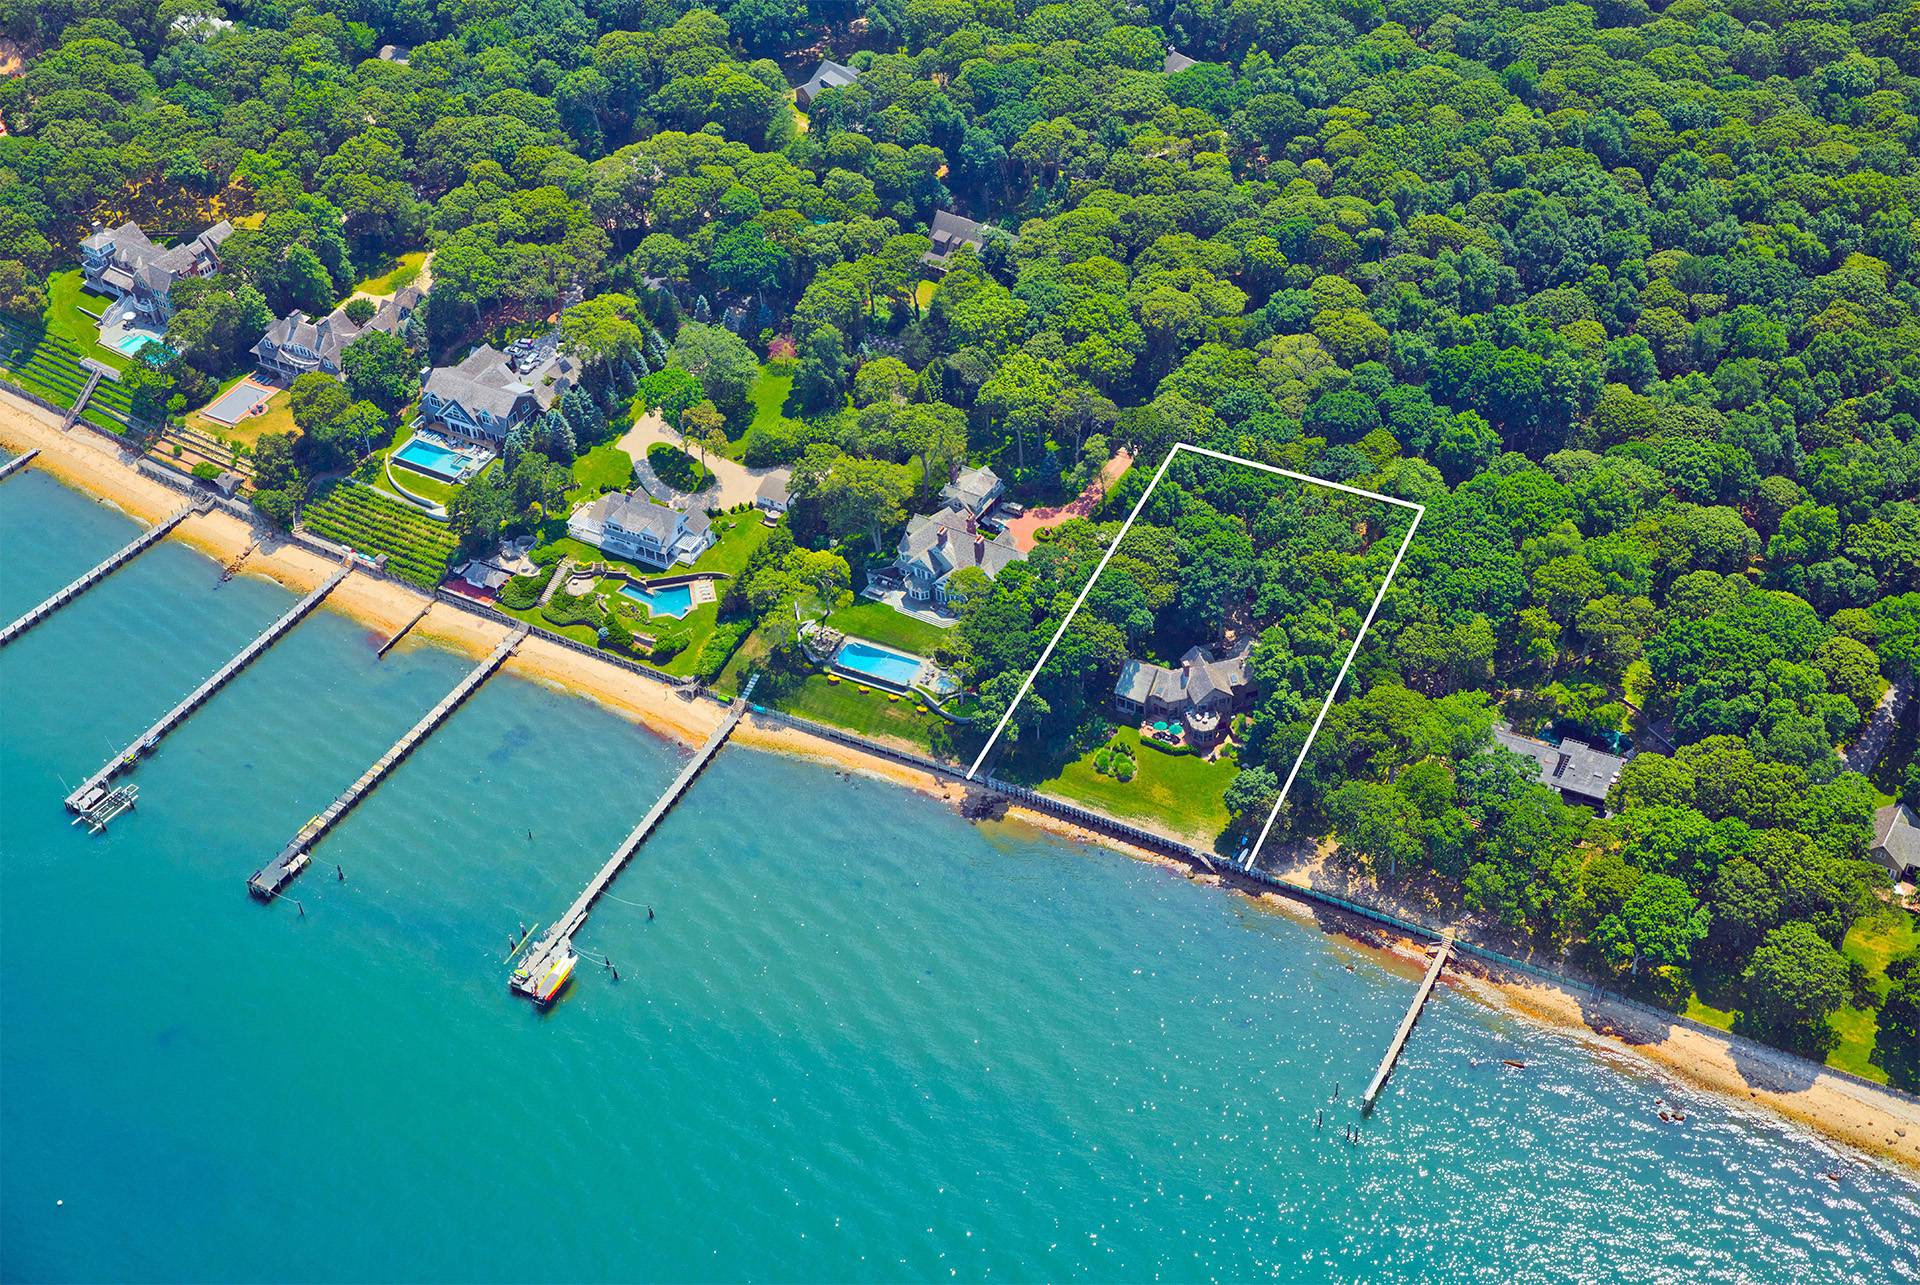 Property for Sale at 56 Forest Road, Sag Harbor, Hamptons, NY - Bedrooms: 5 
Bathrooms: 4  - $10,995,000